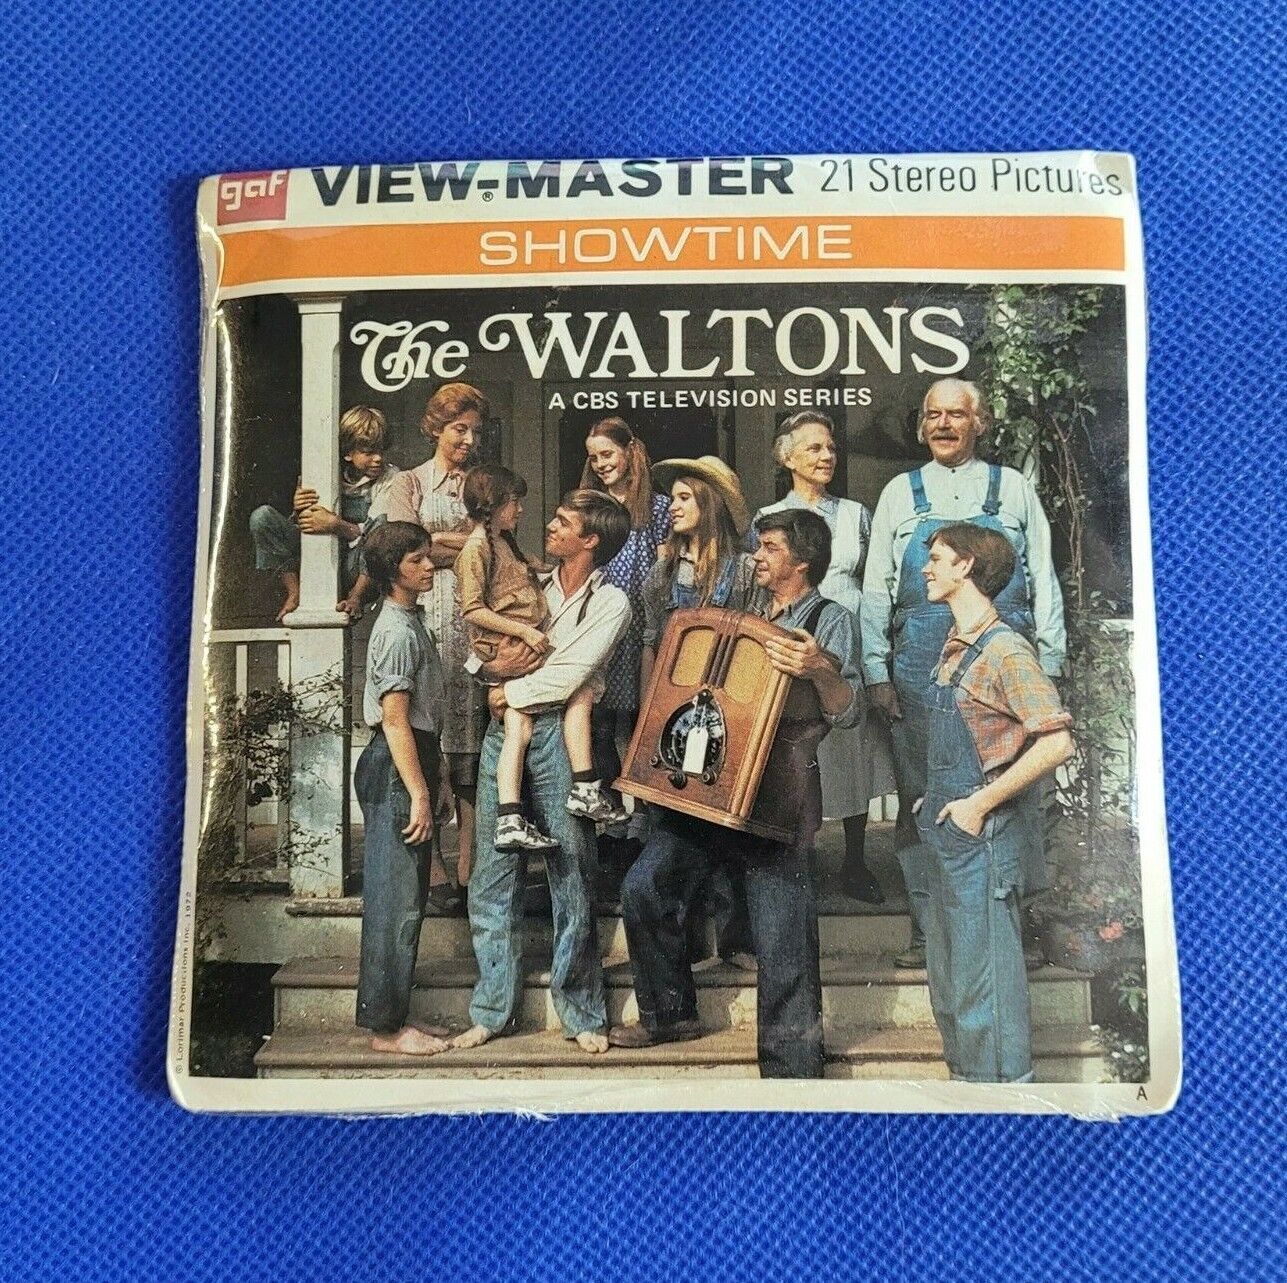 SEALED B596 The Waltons The Separation John Boy TV Show view-master Reels Packet